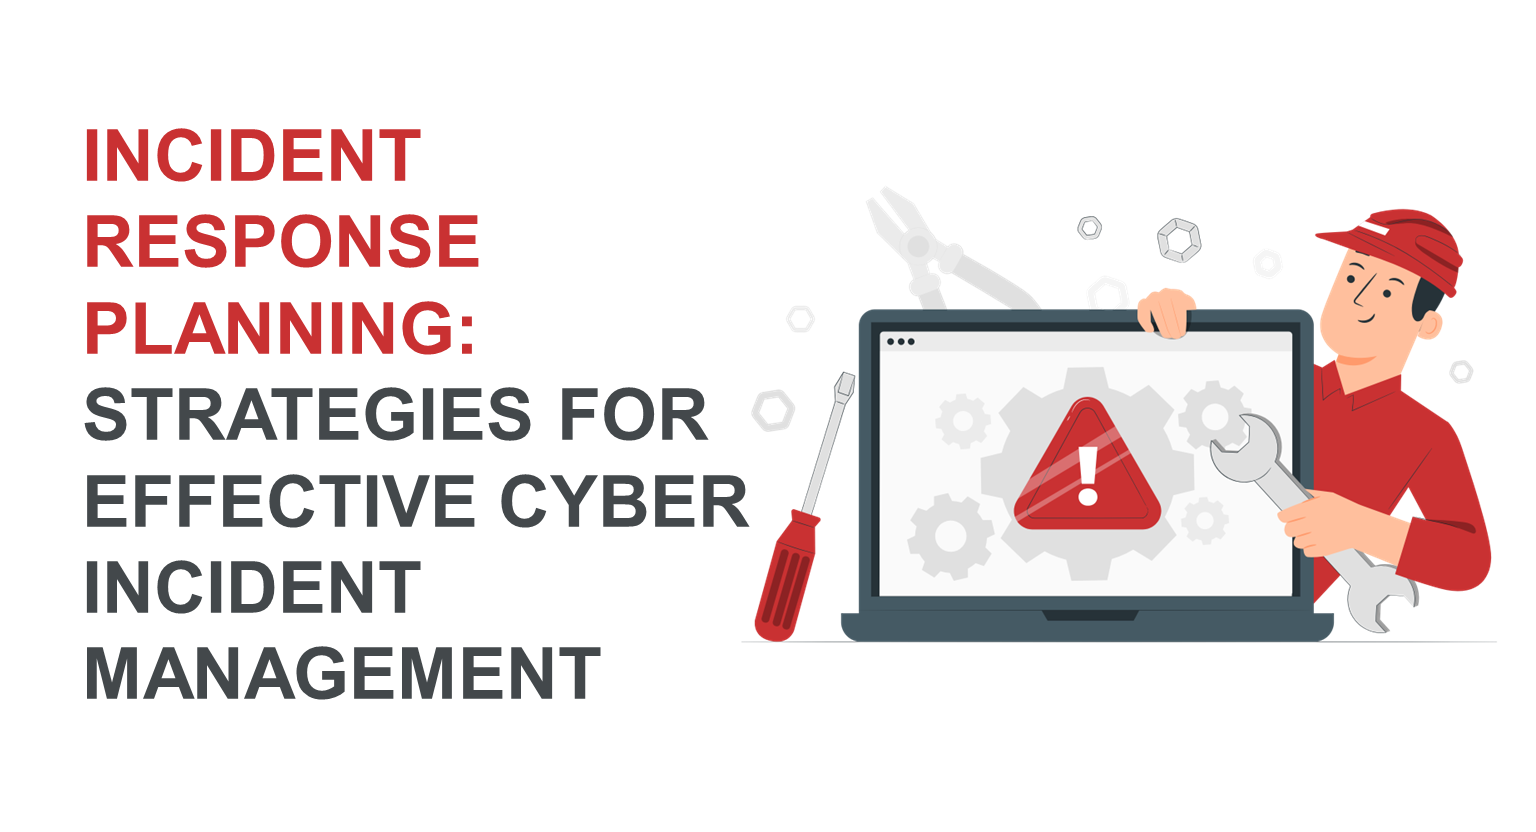 Incident Response Planning: Strategies for Effective Cyber Incident Management